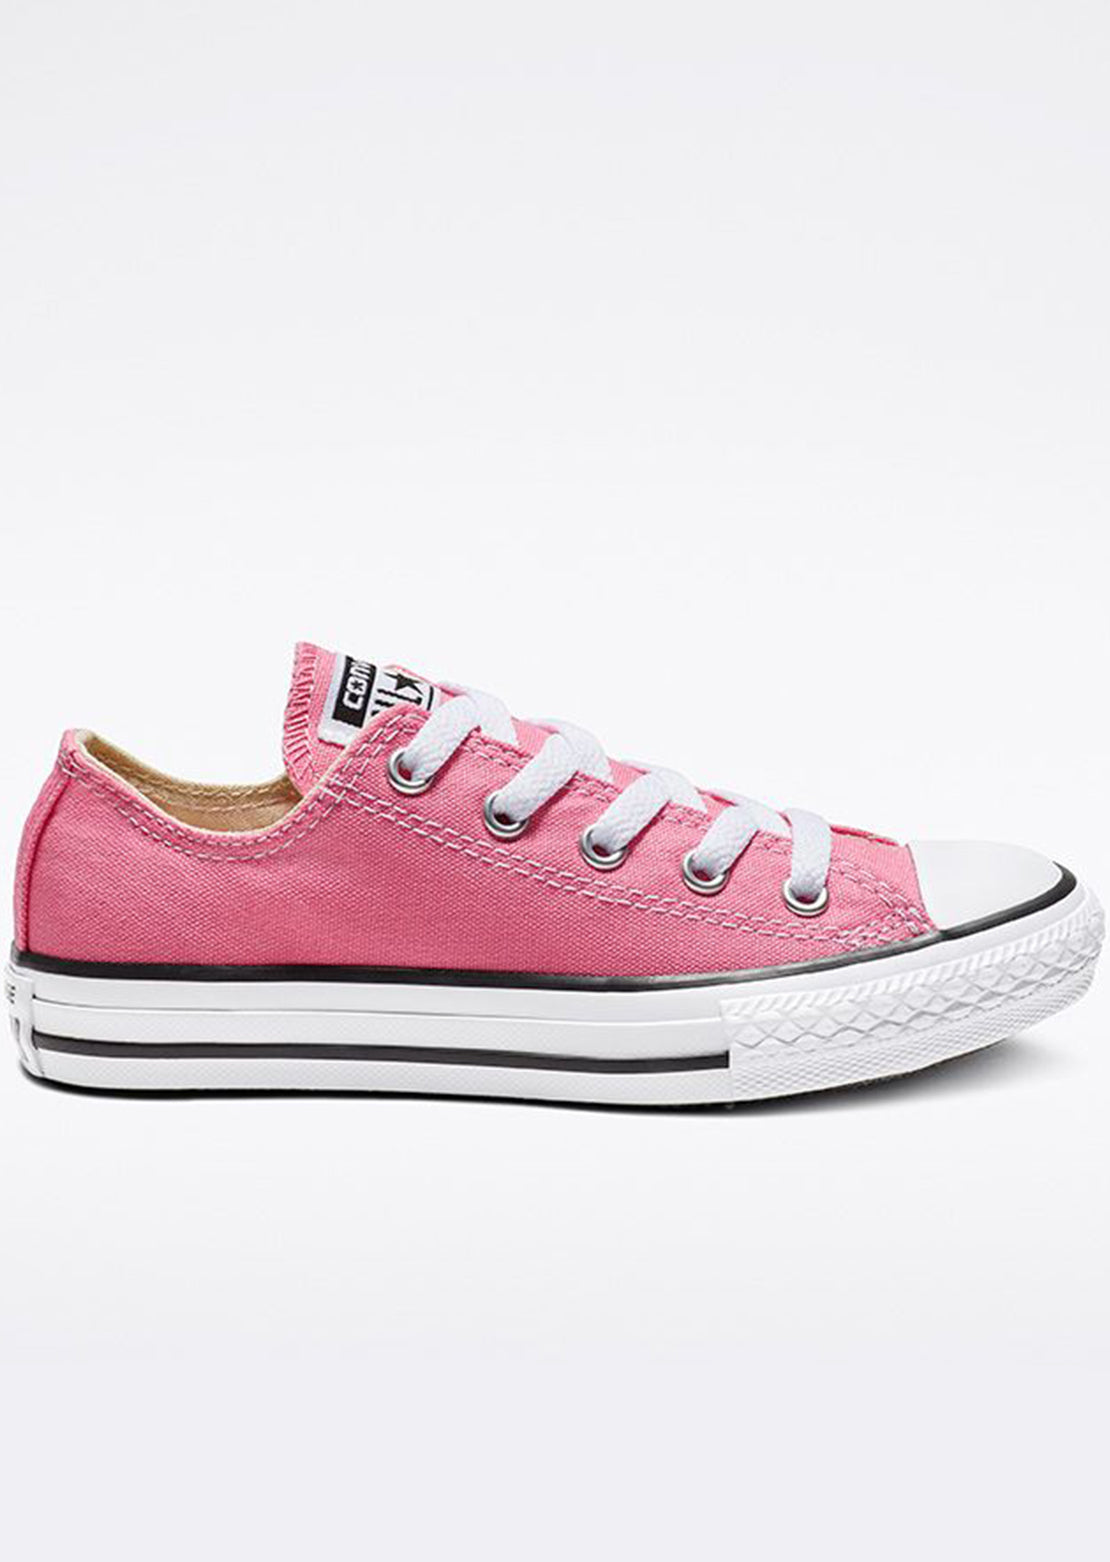 Converse Junior Chuck Taylor Low Top Shoes Pink